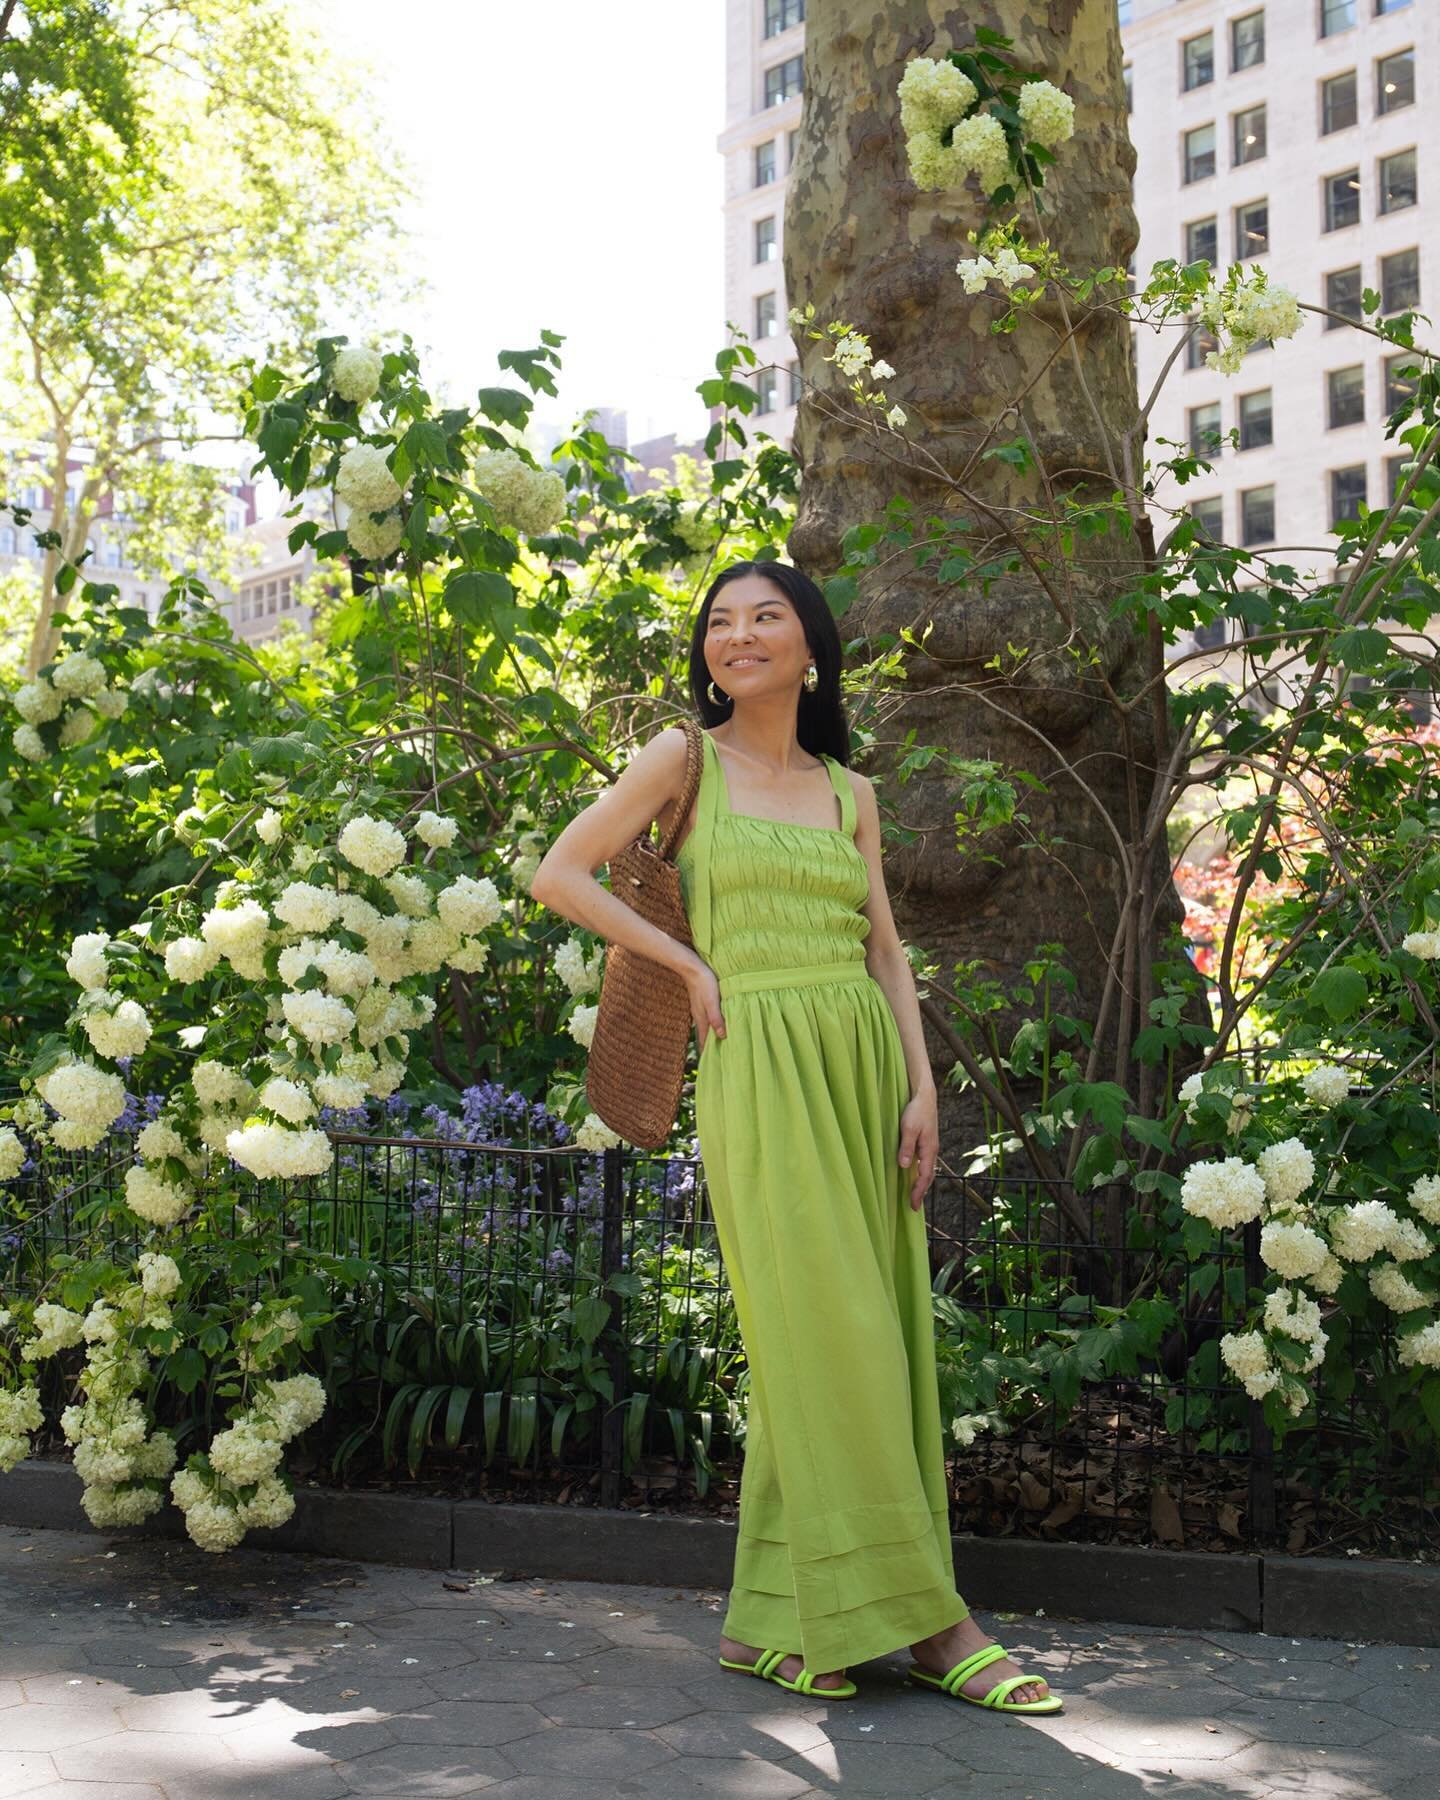 In full bloom 🌿💚
Top + skirt: @darling 
15% off with code SUZANNES

The perfect shade of summer green. The top has absolutely cute smocking, adjustable shoulder ties, and a flared hemline that pairs perfectly with the skirt. An ideal staple for spr